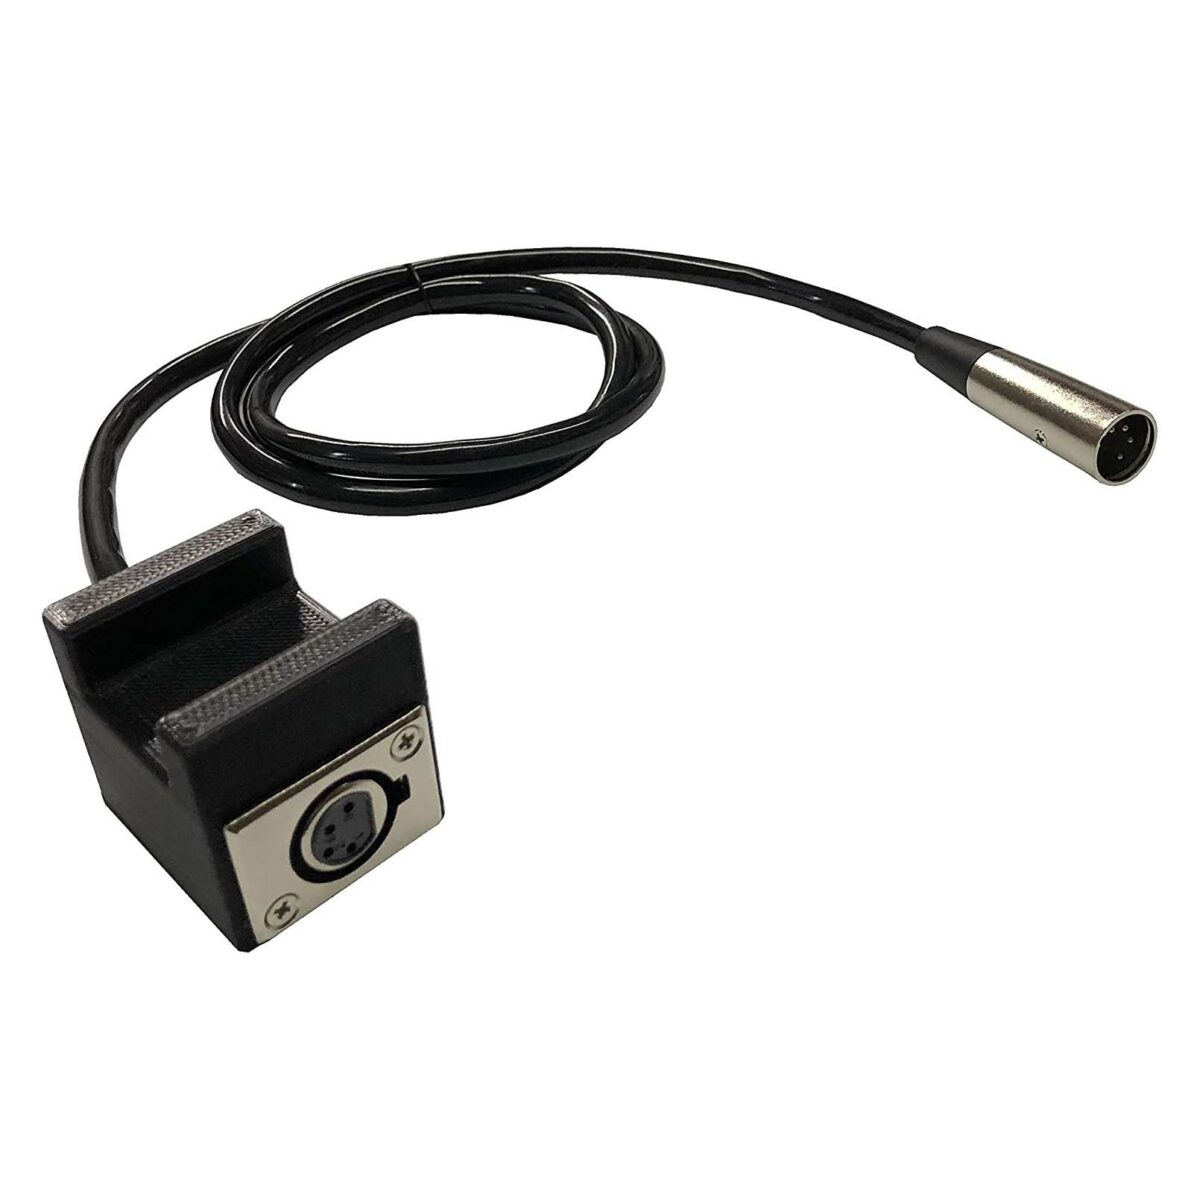 WHILL Power Cable Extension Cord (Model Ci2)